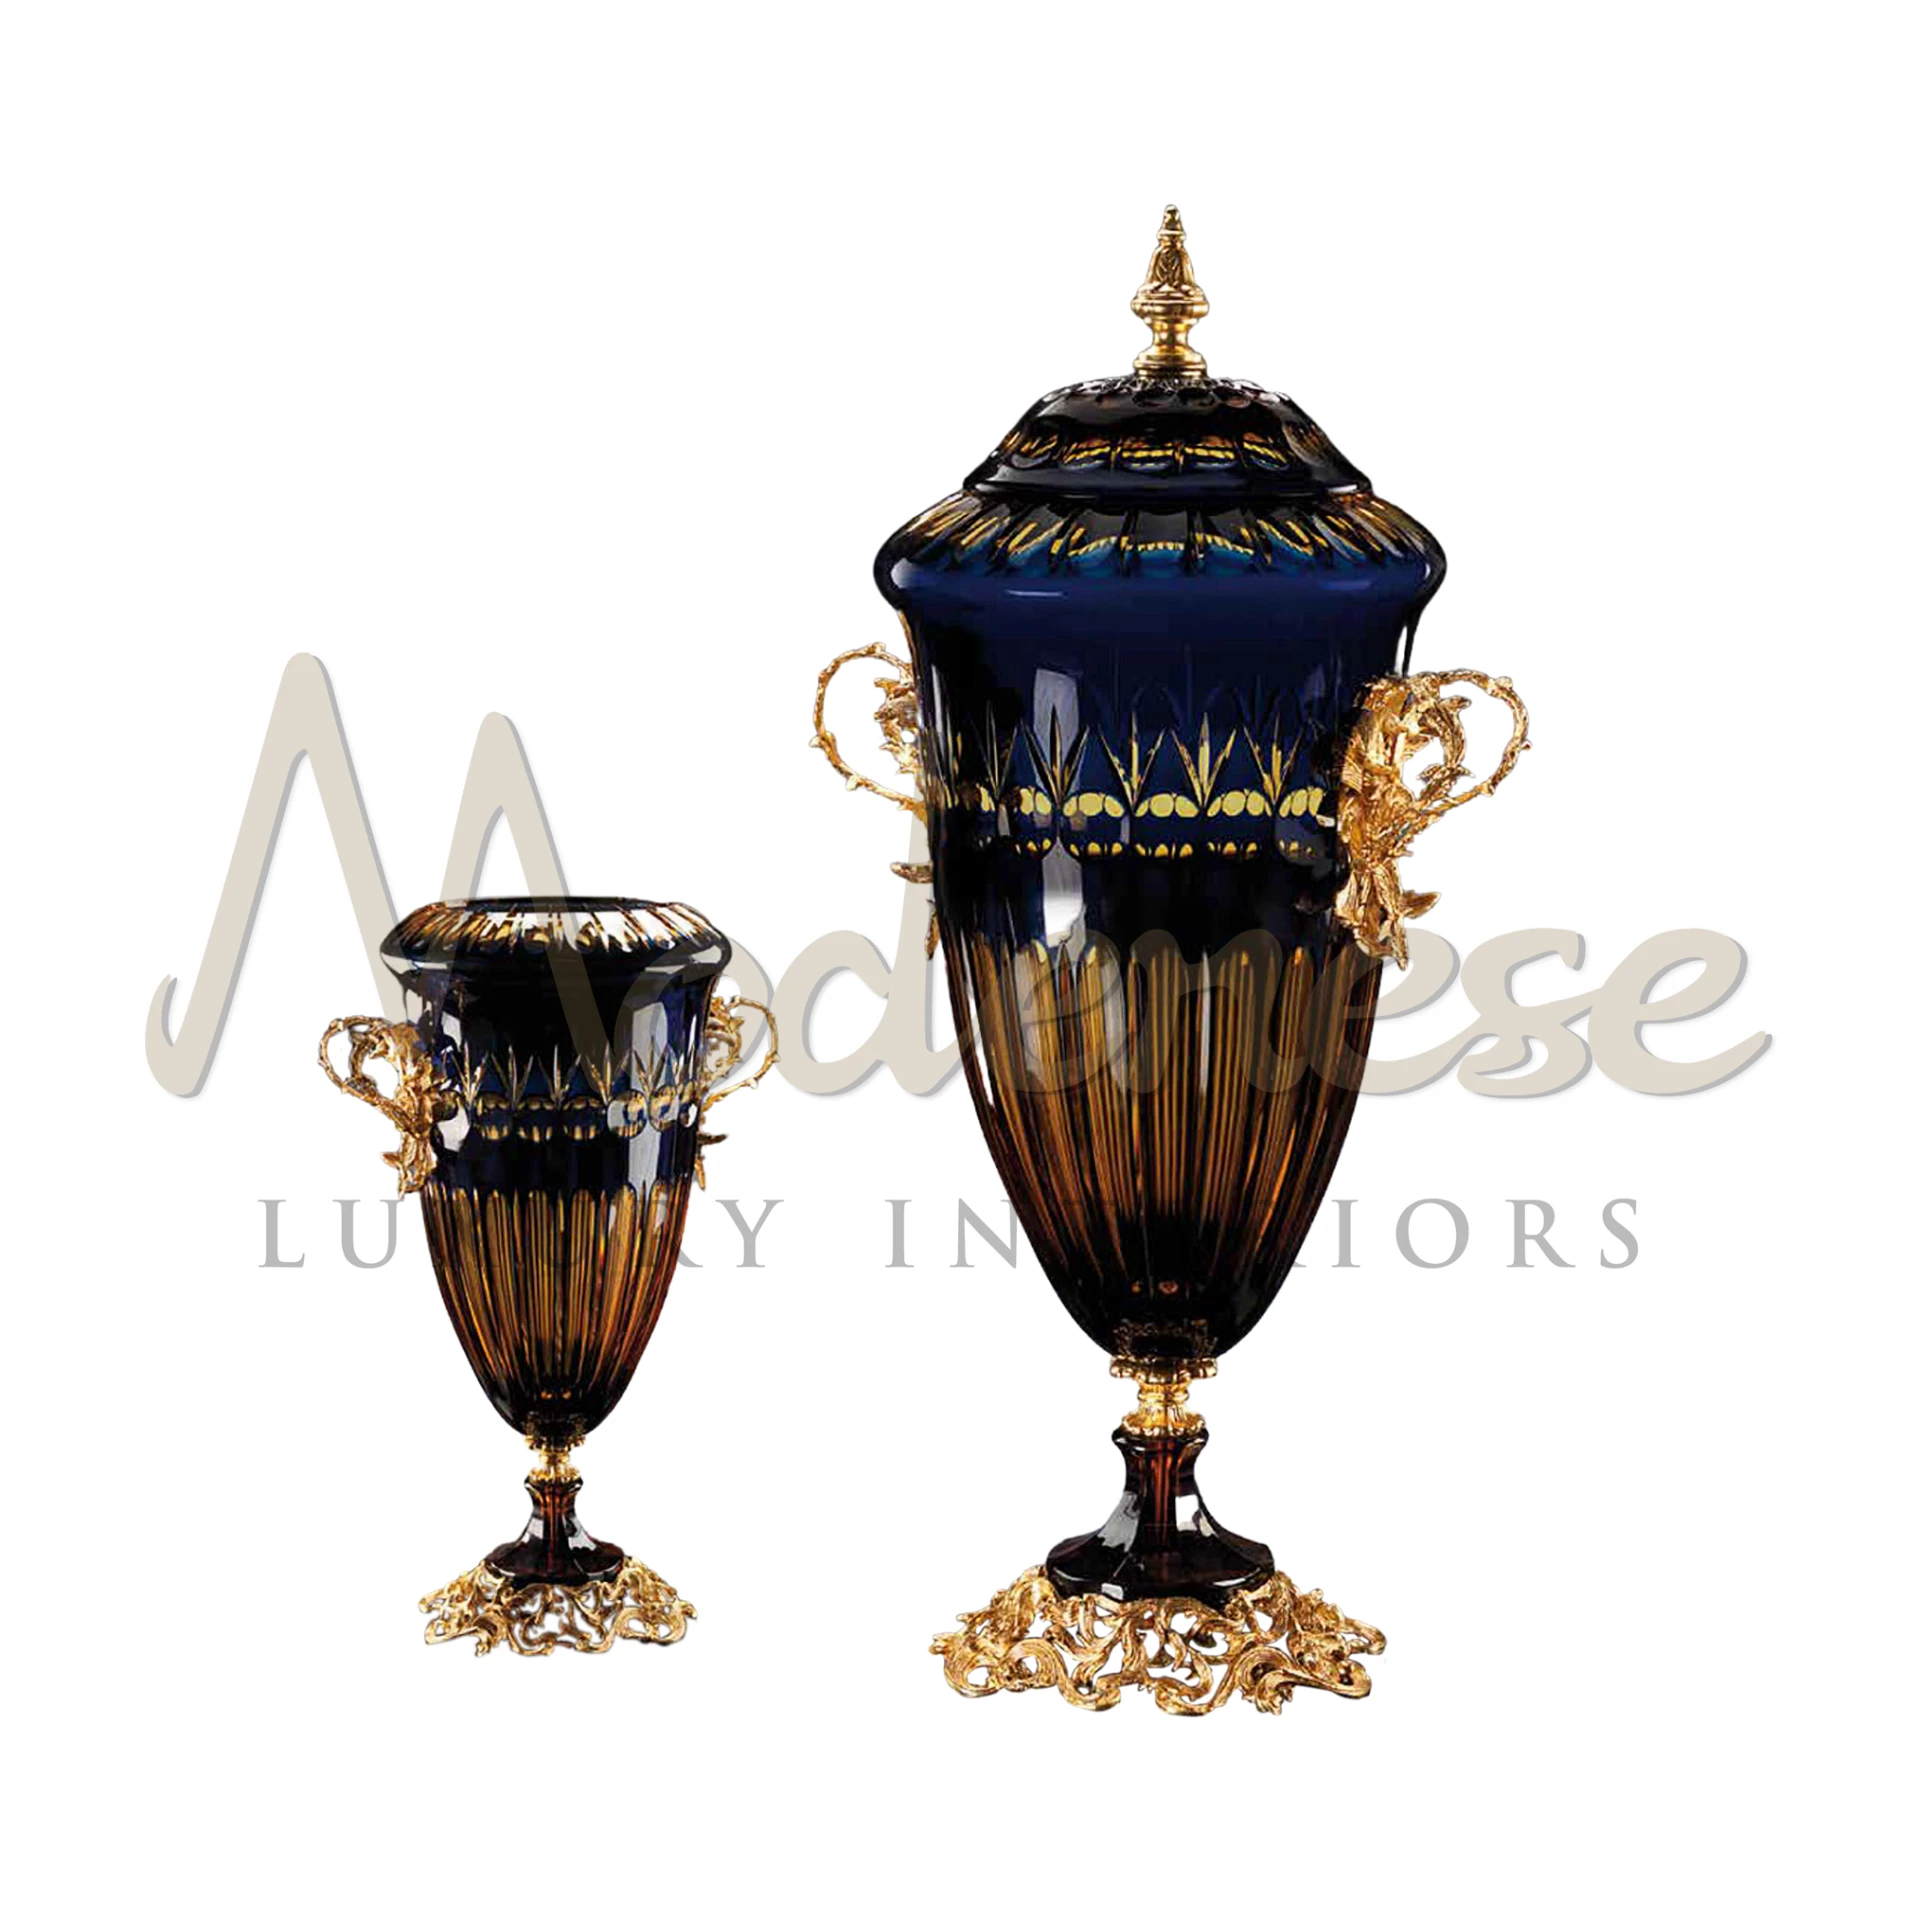 Victorian Dark Glass Amphora, with its distinctive design and quality glass, evokes elegance and history in luxury interiors.